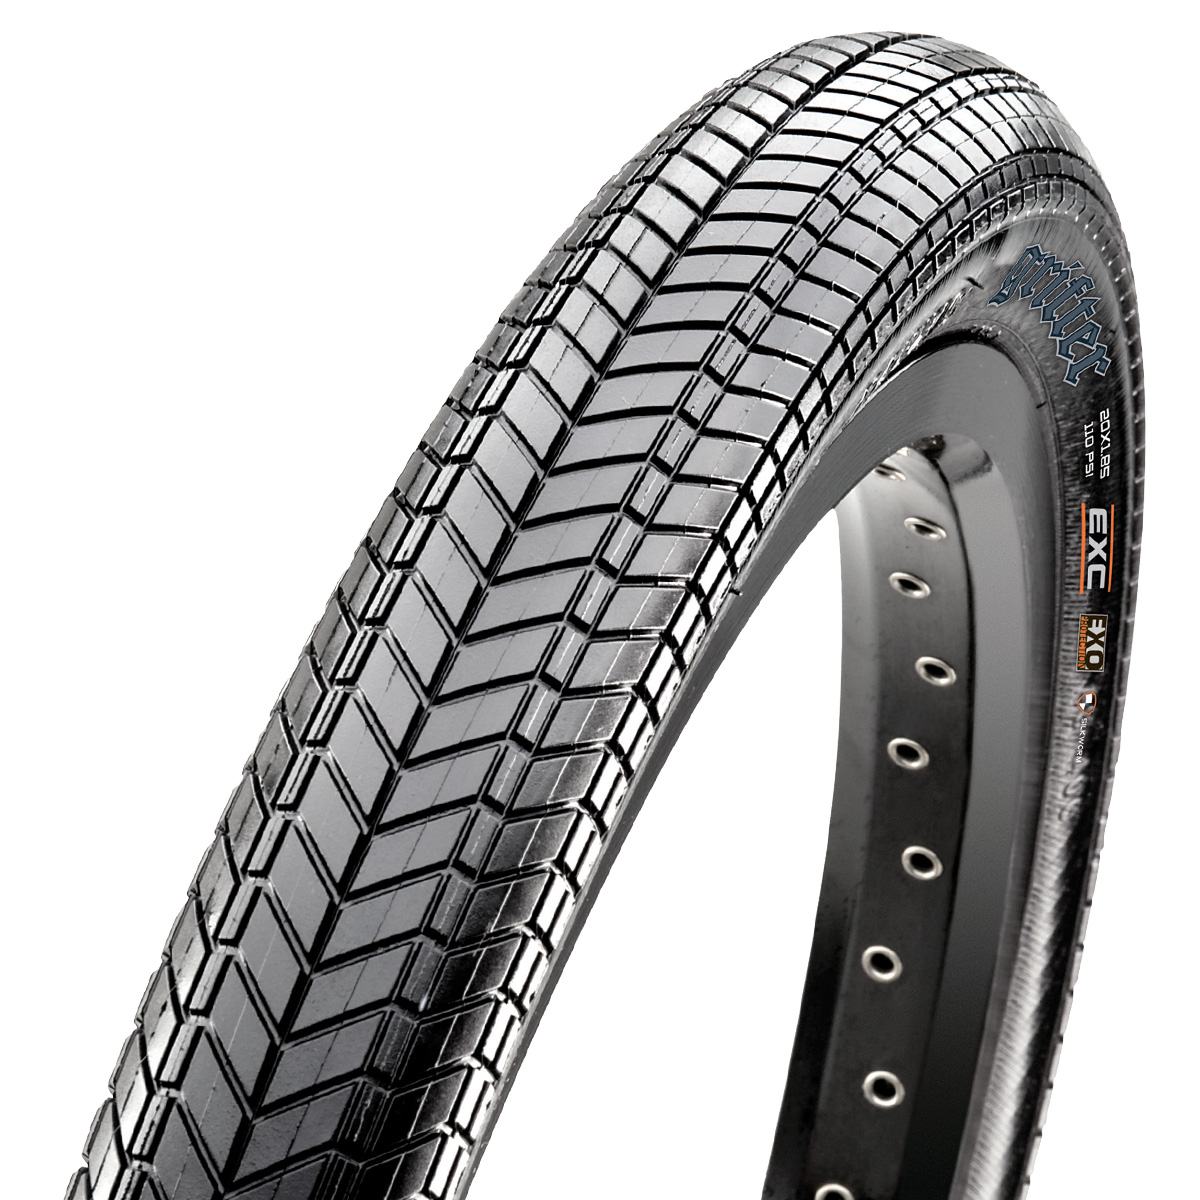 Покришка складна Maxxis 20x2.10 Grifter, 120TPI 